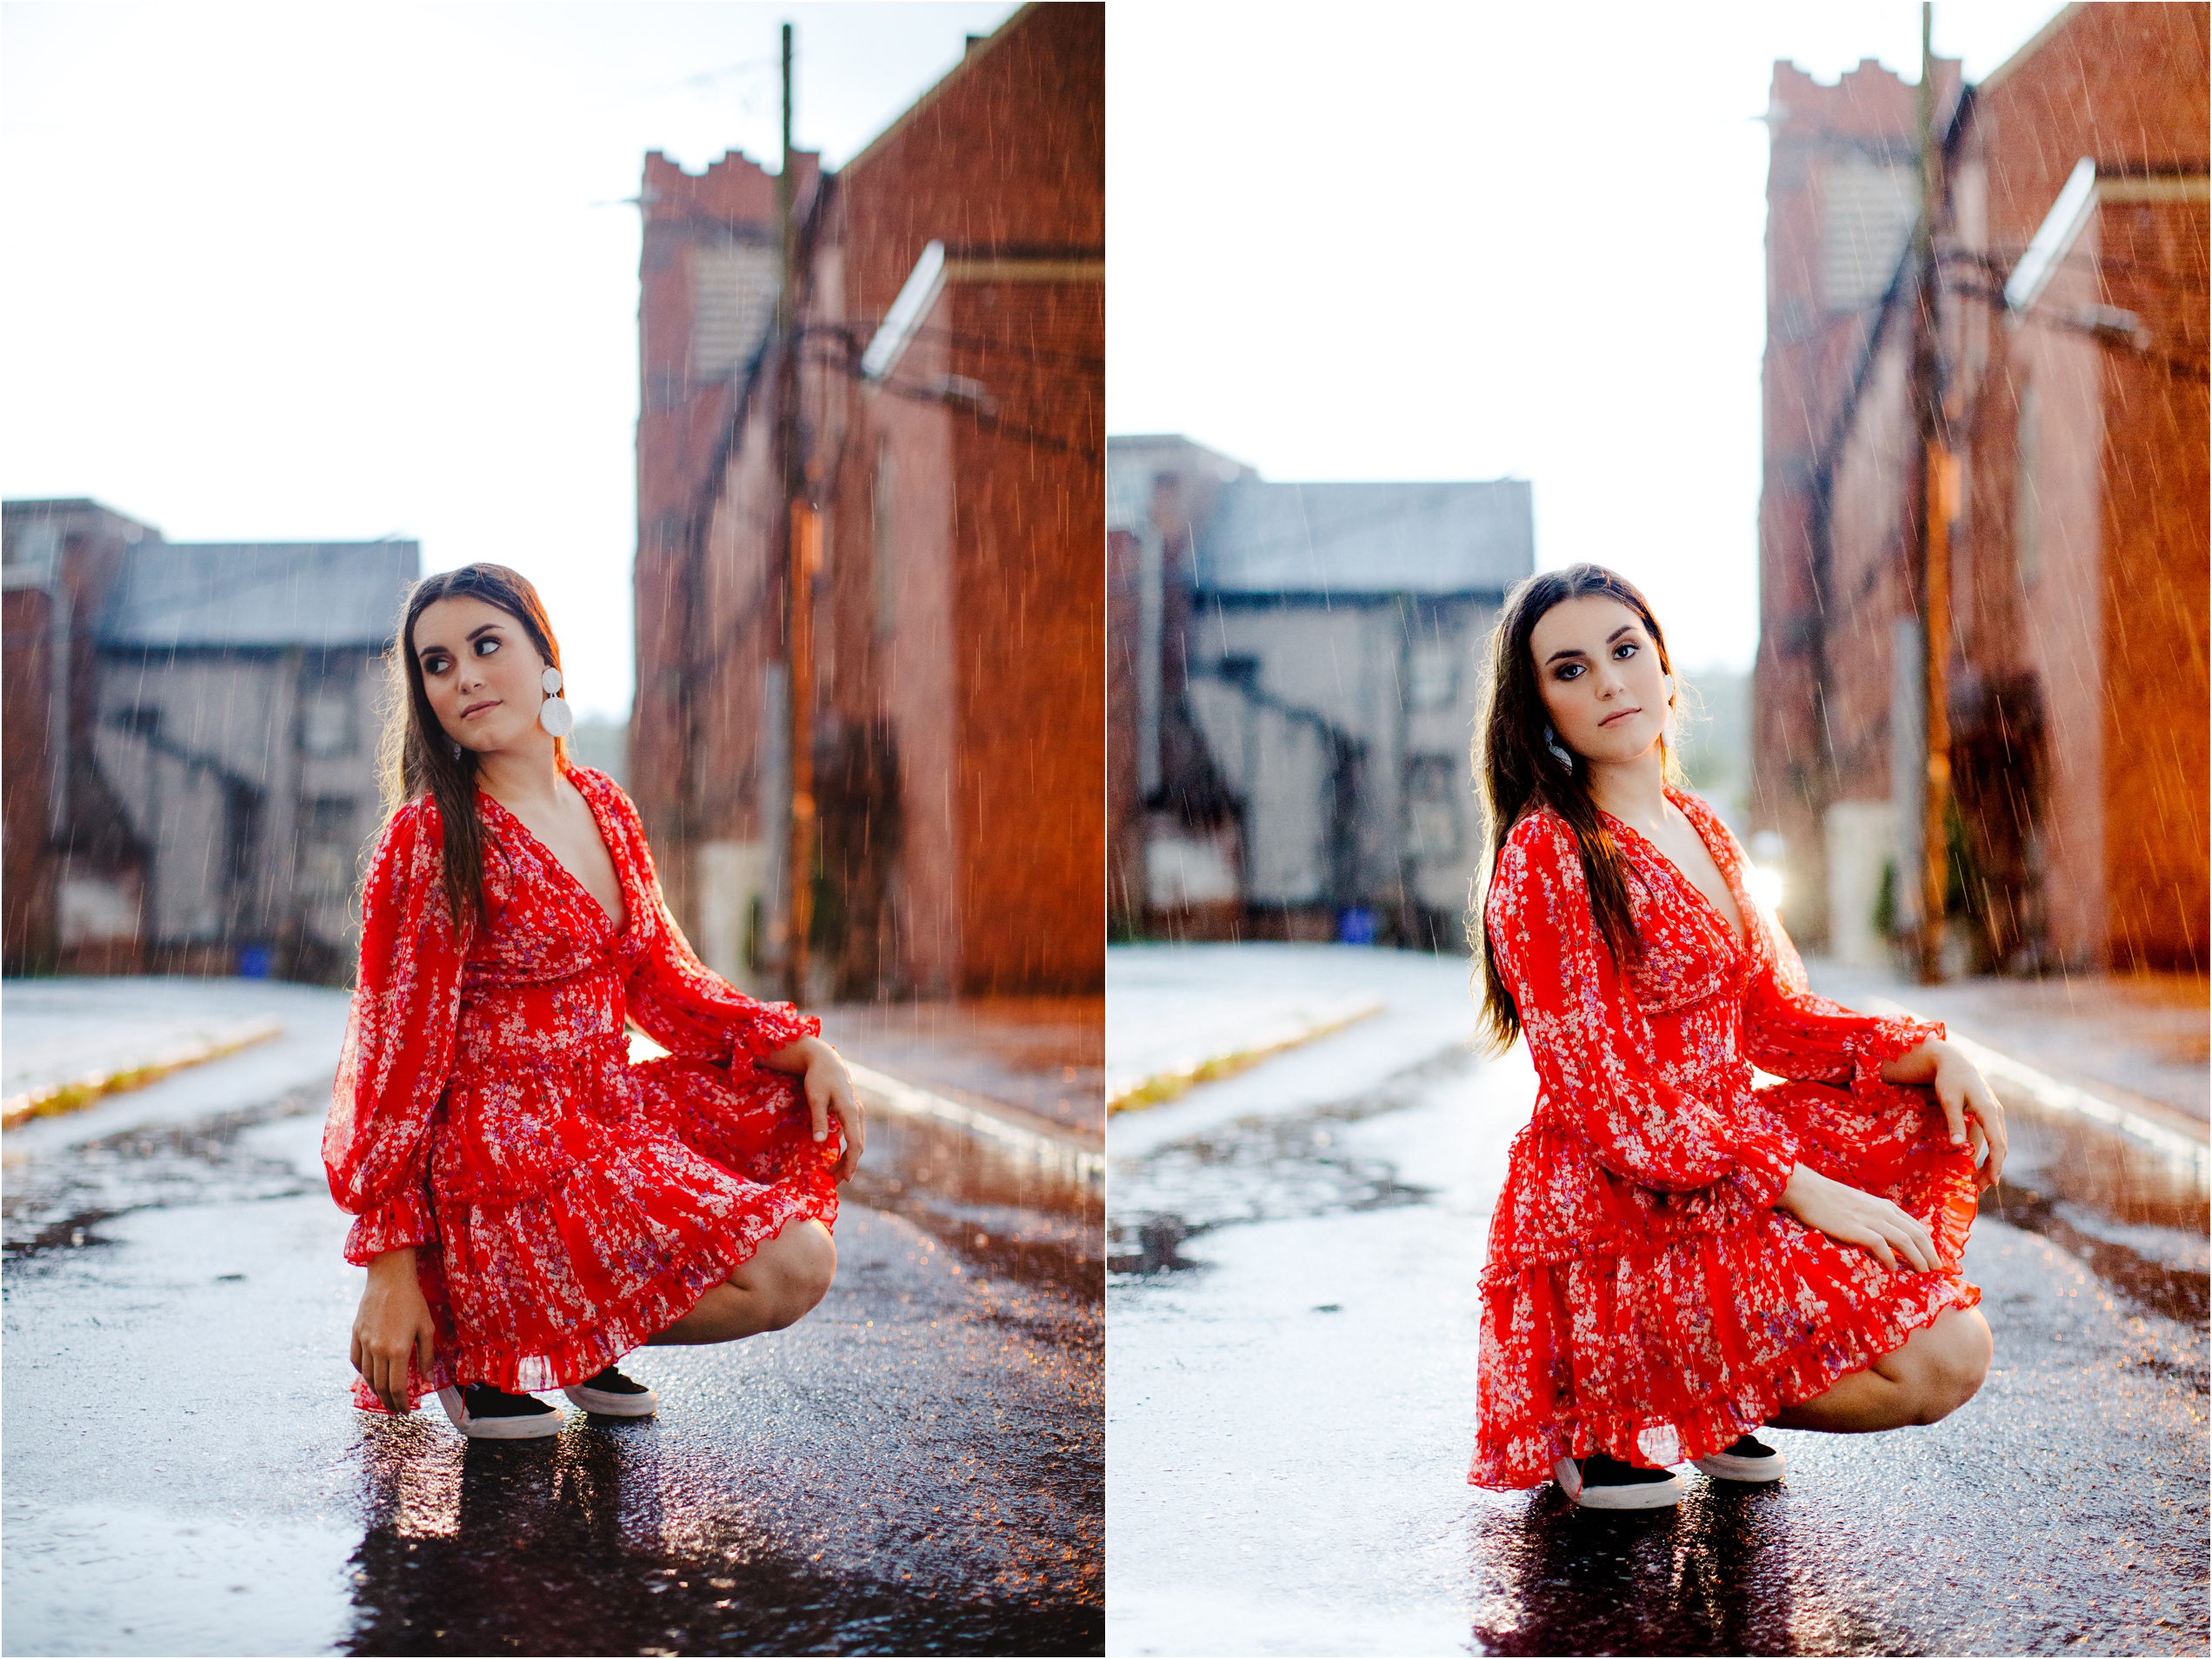 Kendall poses on a rainy street in a bright red trendy mini dress for her senior photos in downtown Harrisburg PA.